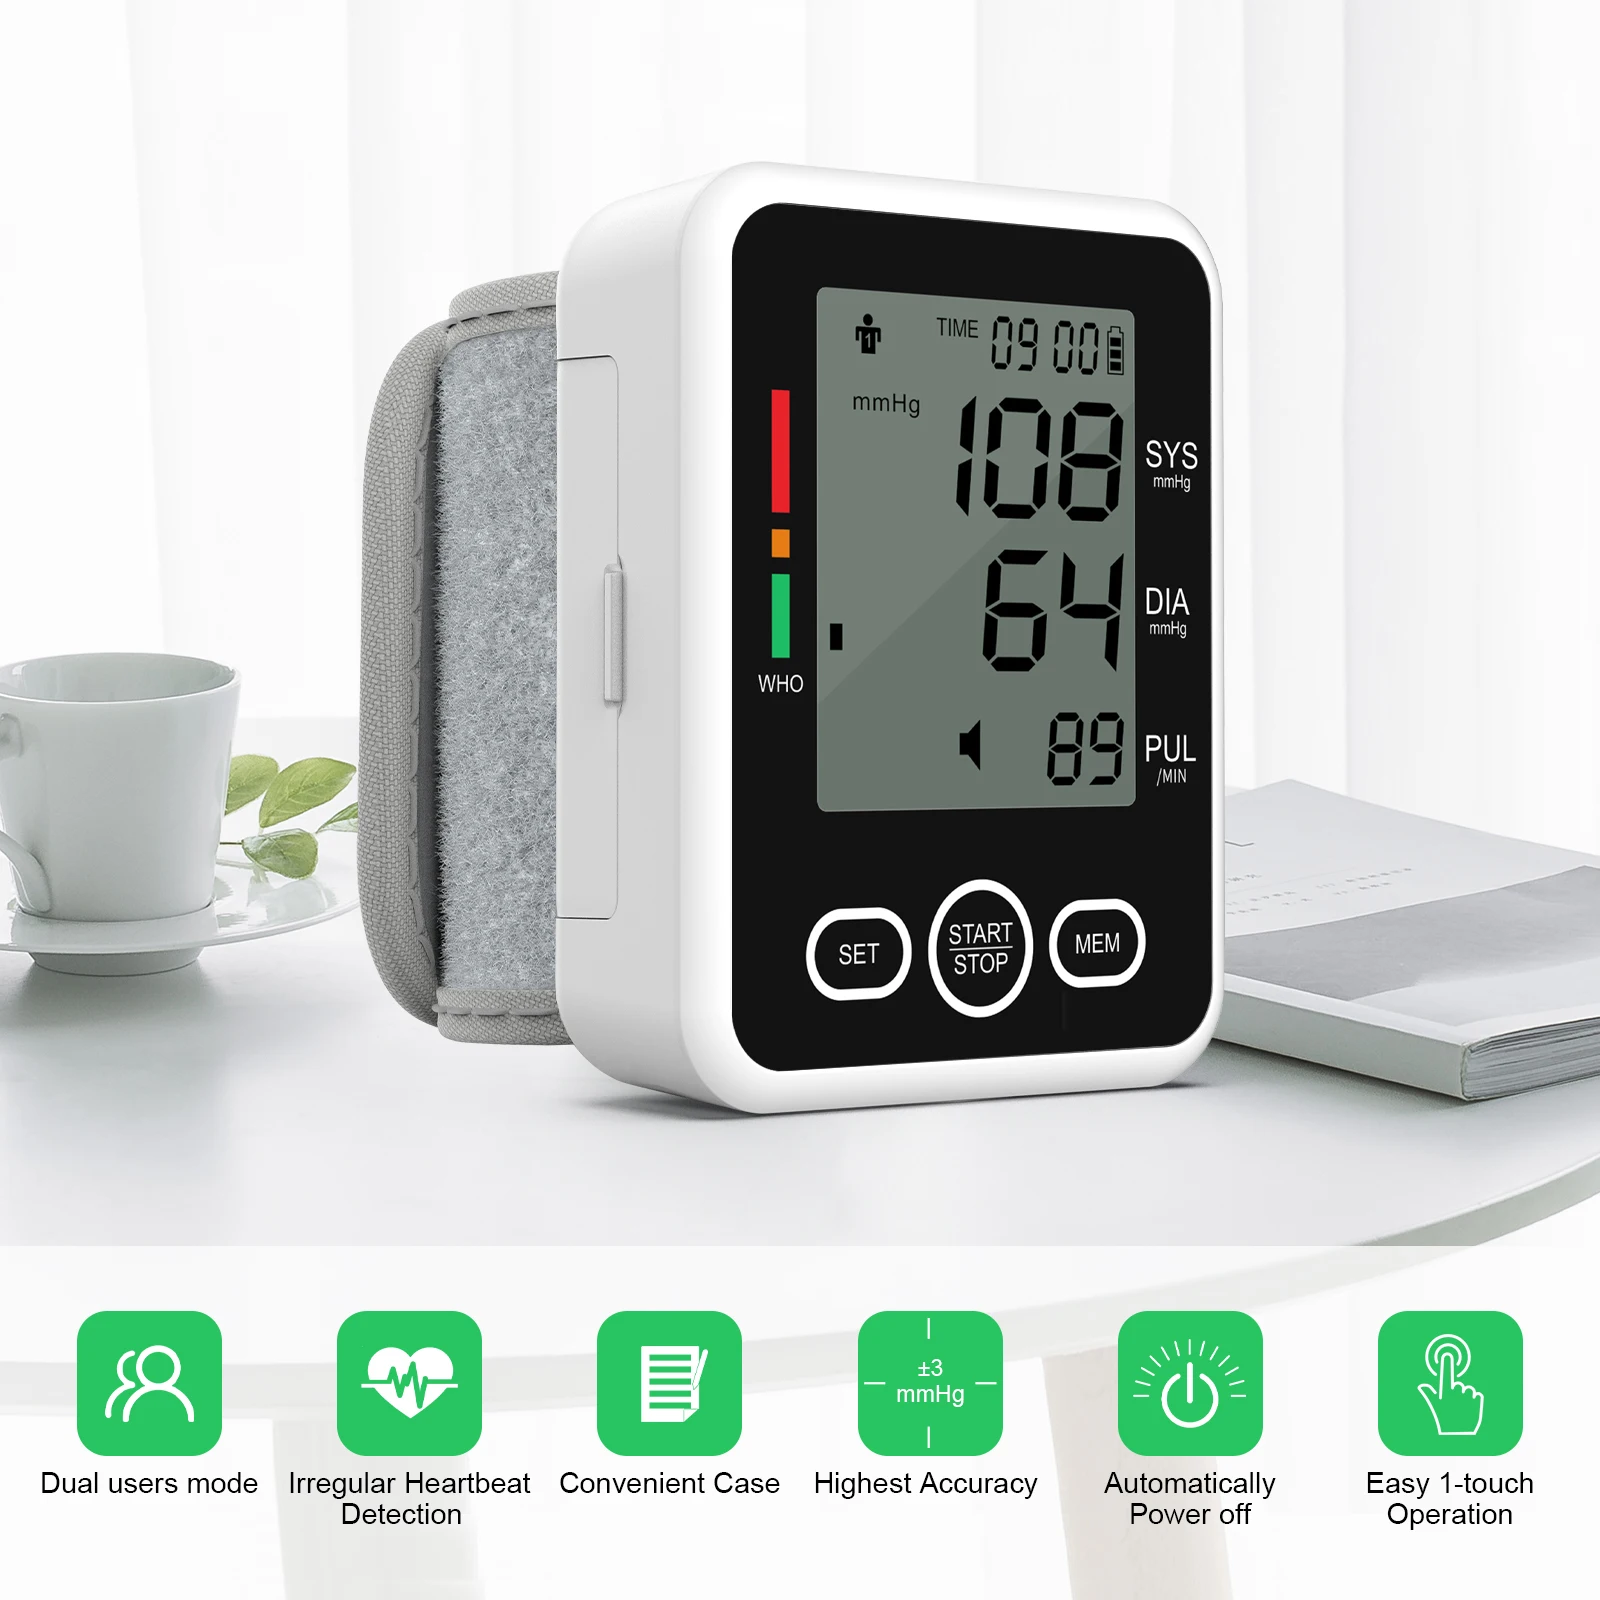 https://ae01.alicdn.com/kf/S73781659b1c54008b6ace9d89a4d3624i/Wrist-Blood-Pressure-Monitor-Blood-Pressure-Machine-Have-Large-LED-Display-Automatic-99x2-Sets-Memory-for.jpg